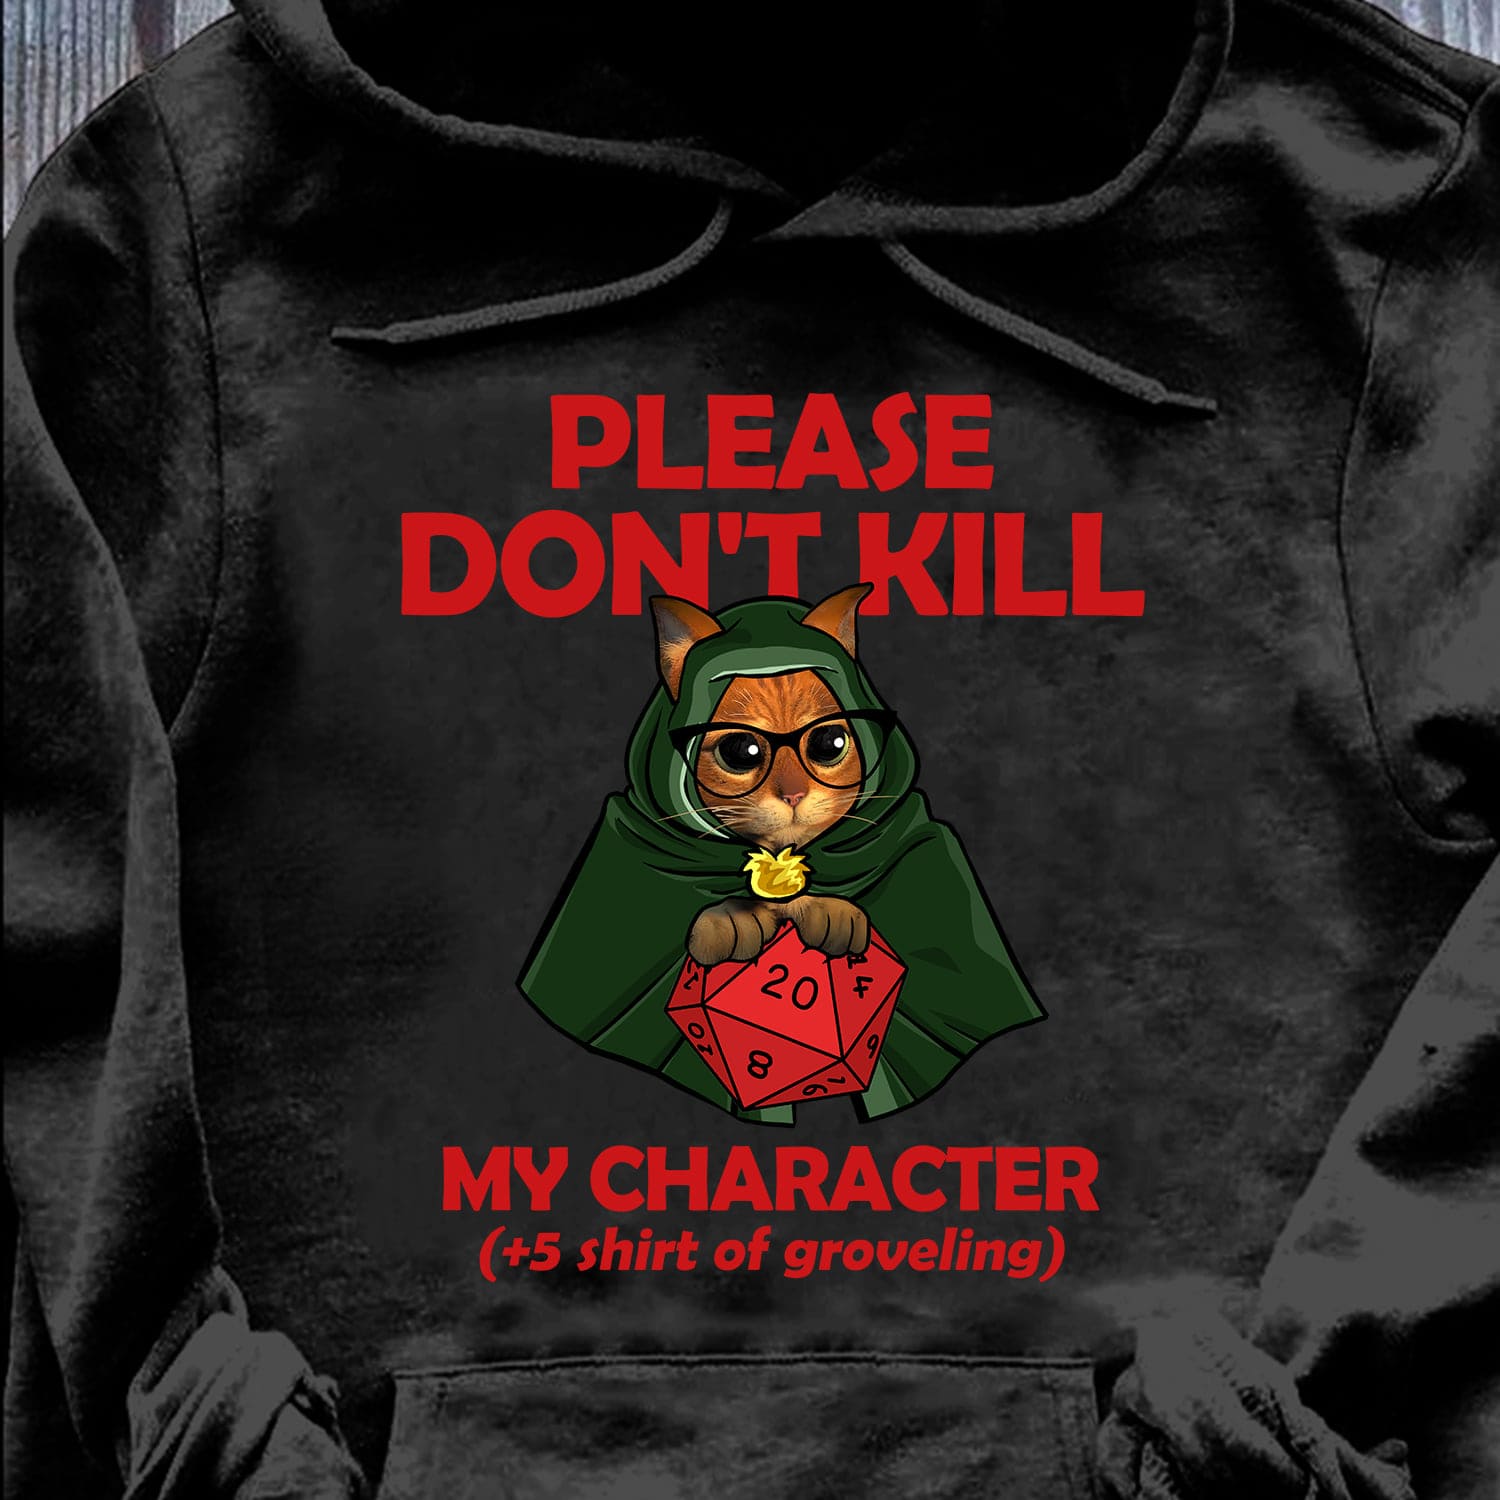 Please don't kill my character - Shirt of groveling, Cat and Dices, Dungeons and Dragons